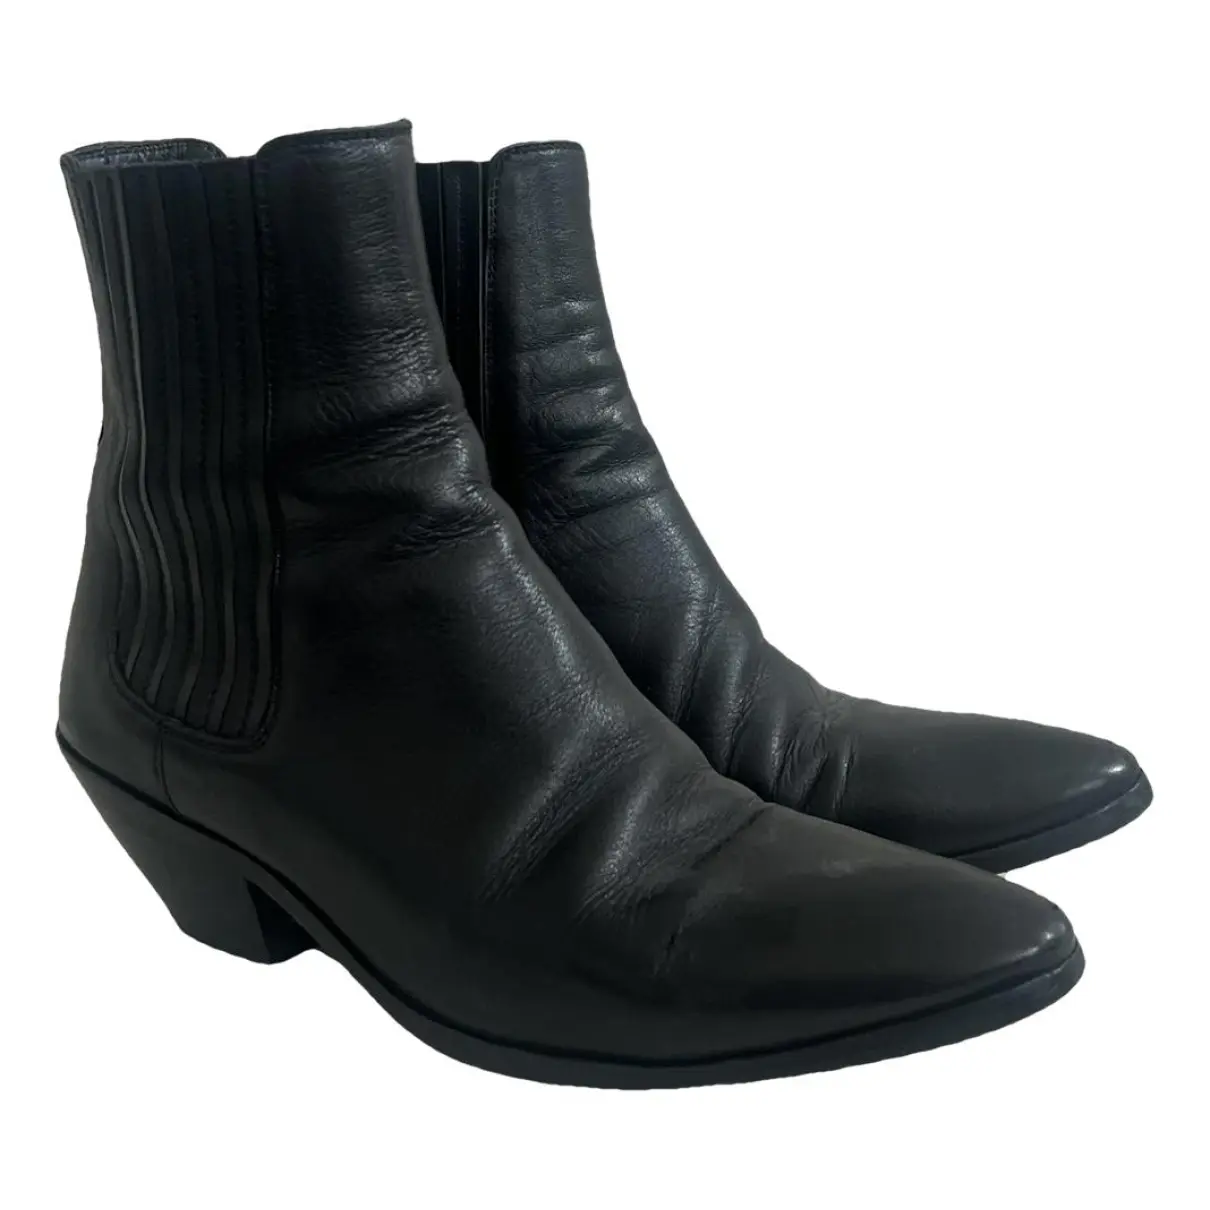 West Chelsea leather western boots